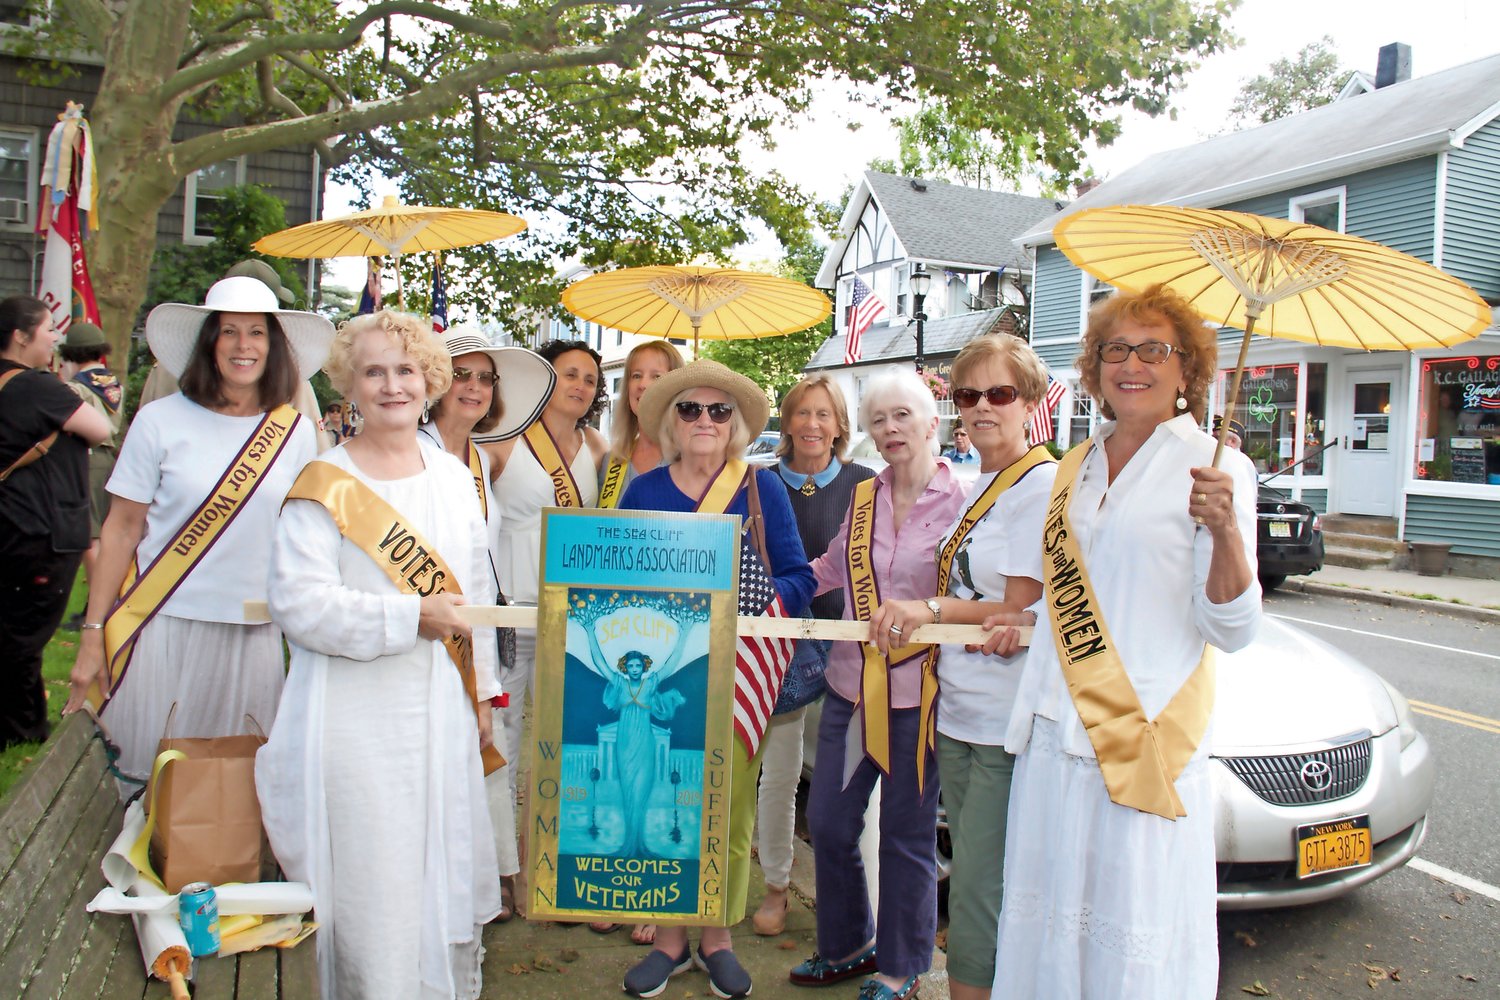 Members of the Sea Cliff Landmarks Association represented women’s suffrage.